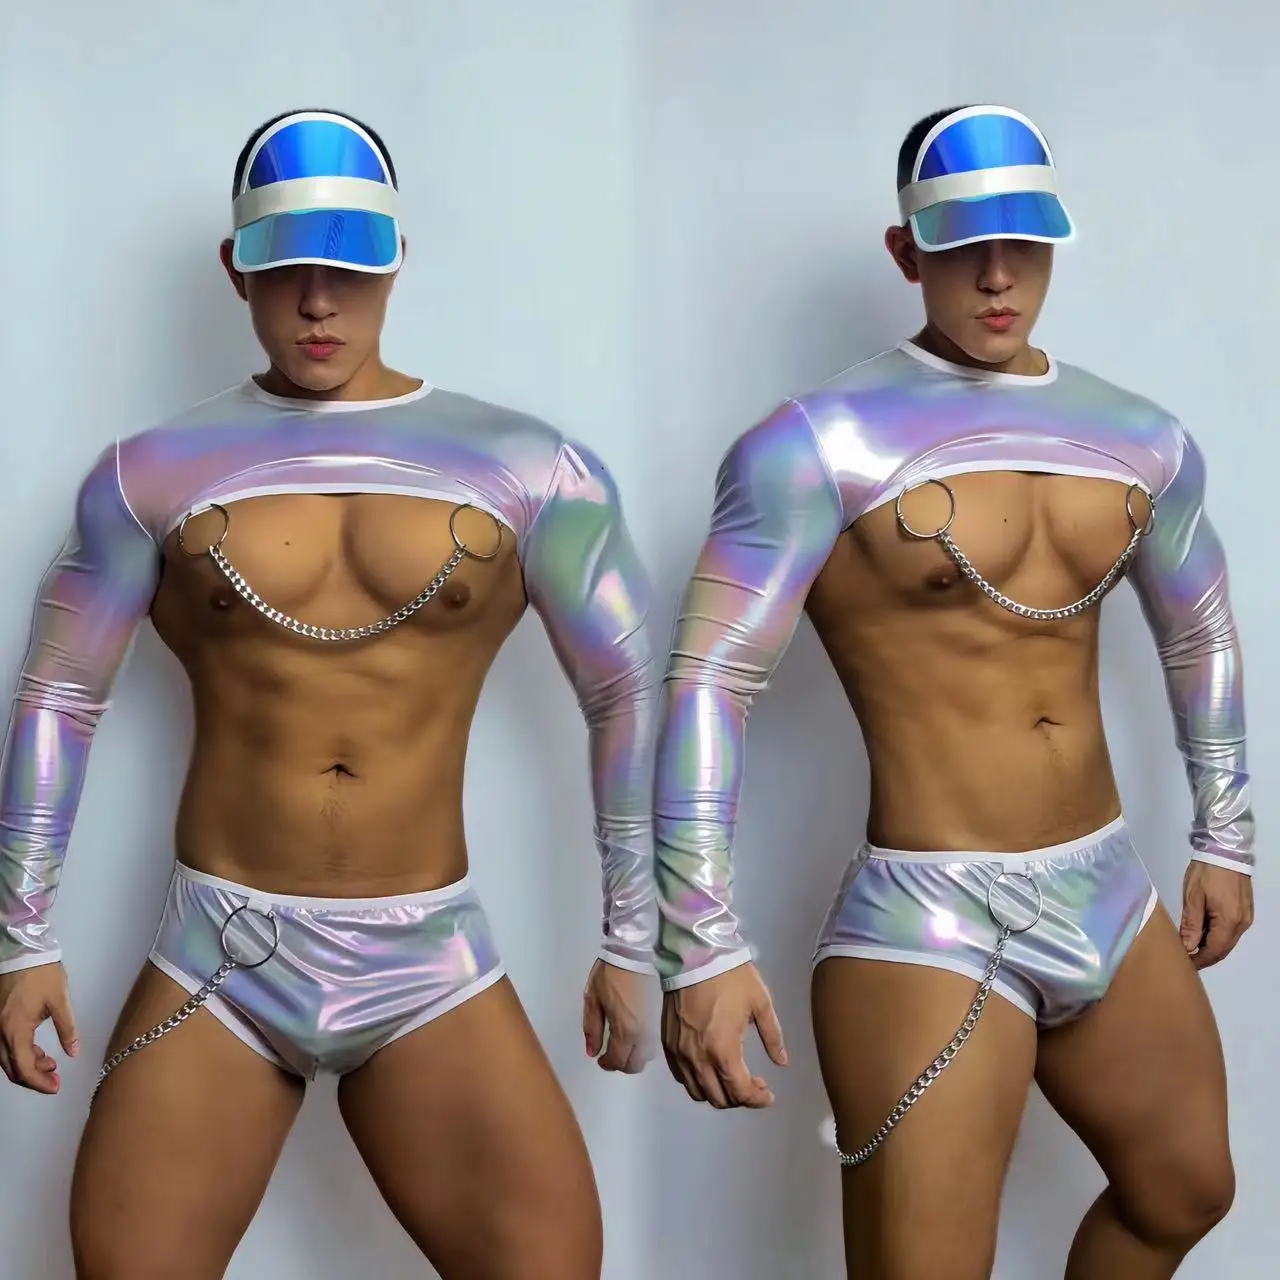 

Muscle Man Gogo Dancing Clothes Bar Club Male Jazz Pole Dance Costume Sexy Laser Tops Shorts Party Ds Dj Rave Outfit